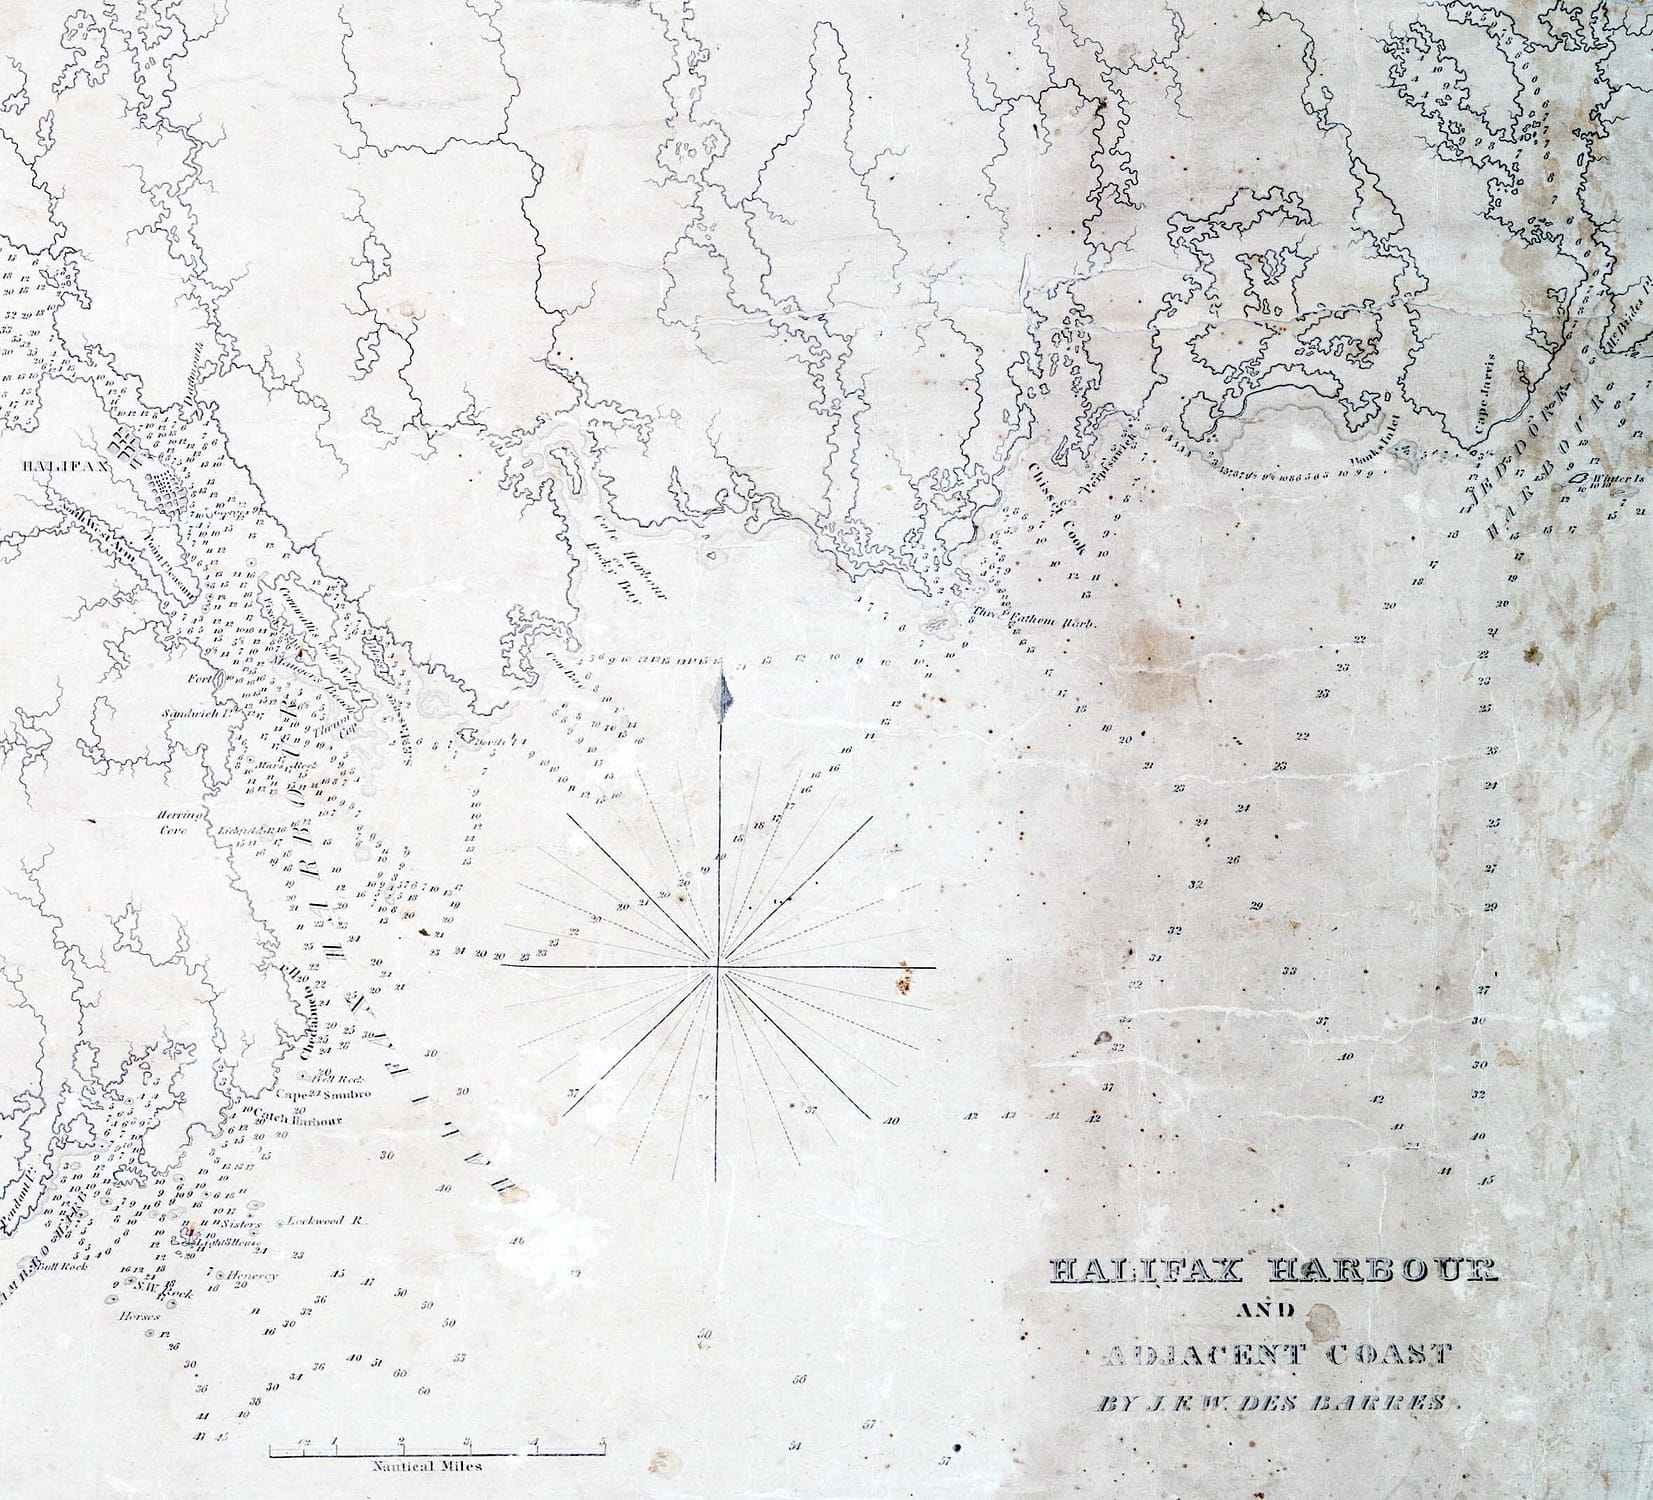 The north eastern coast of North America : from New York to Cape Canso, including Sable Island